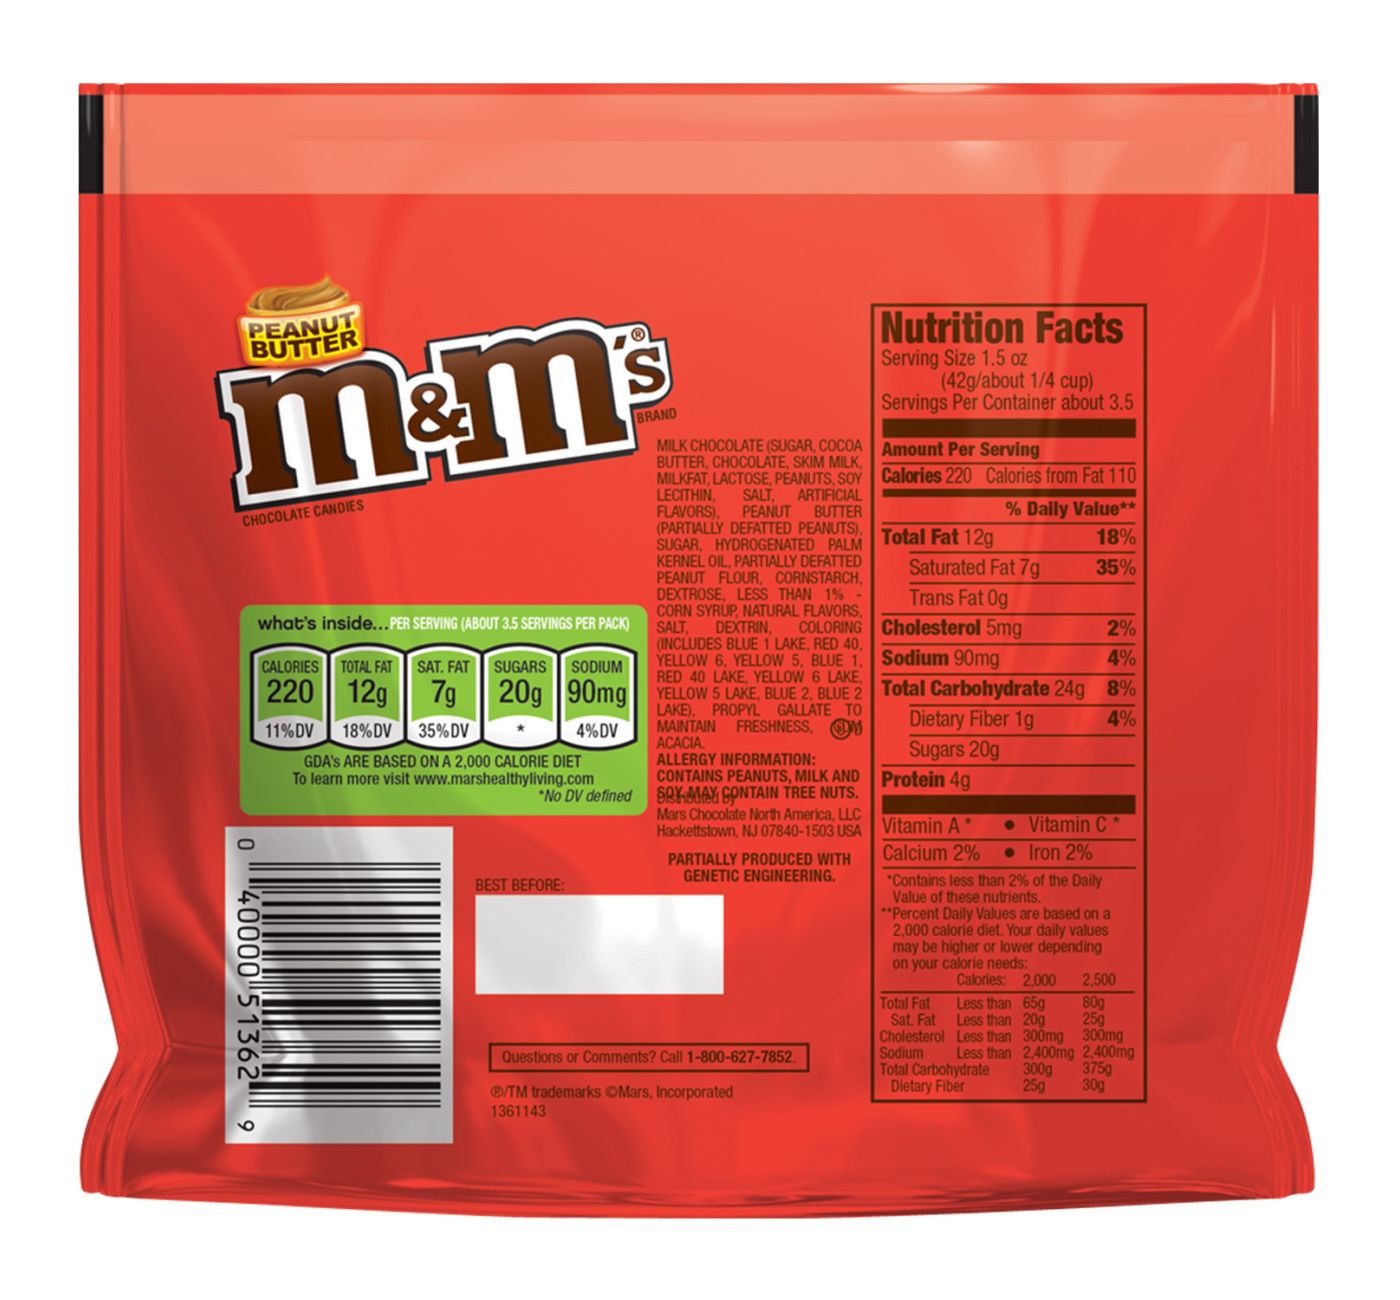 Calories in M&M's Peanut Butter M&M's and Nutrition Facts